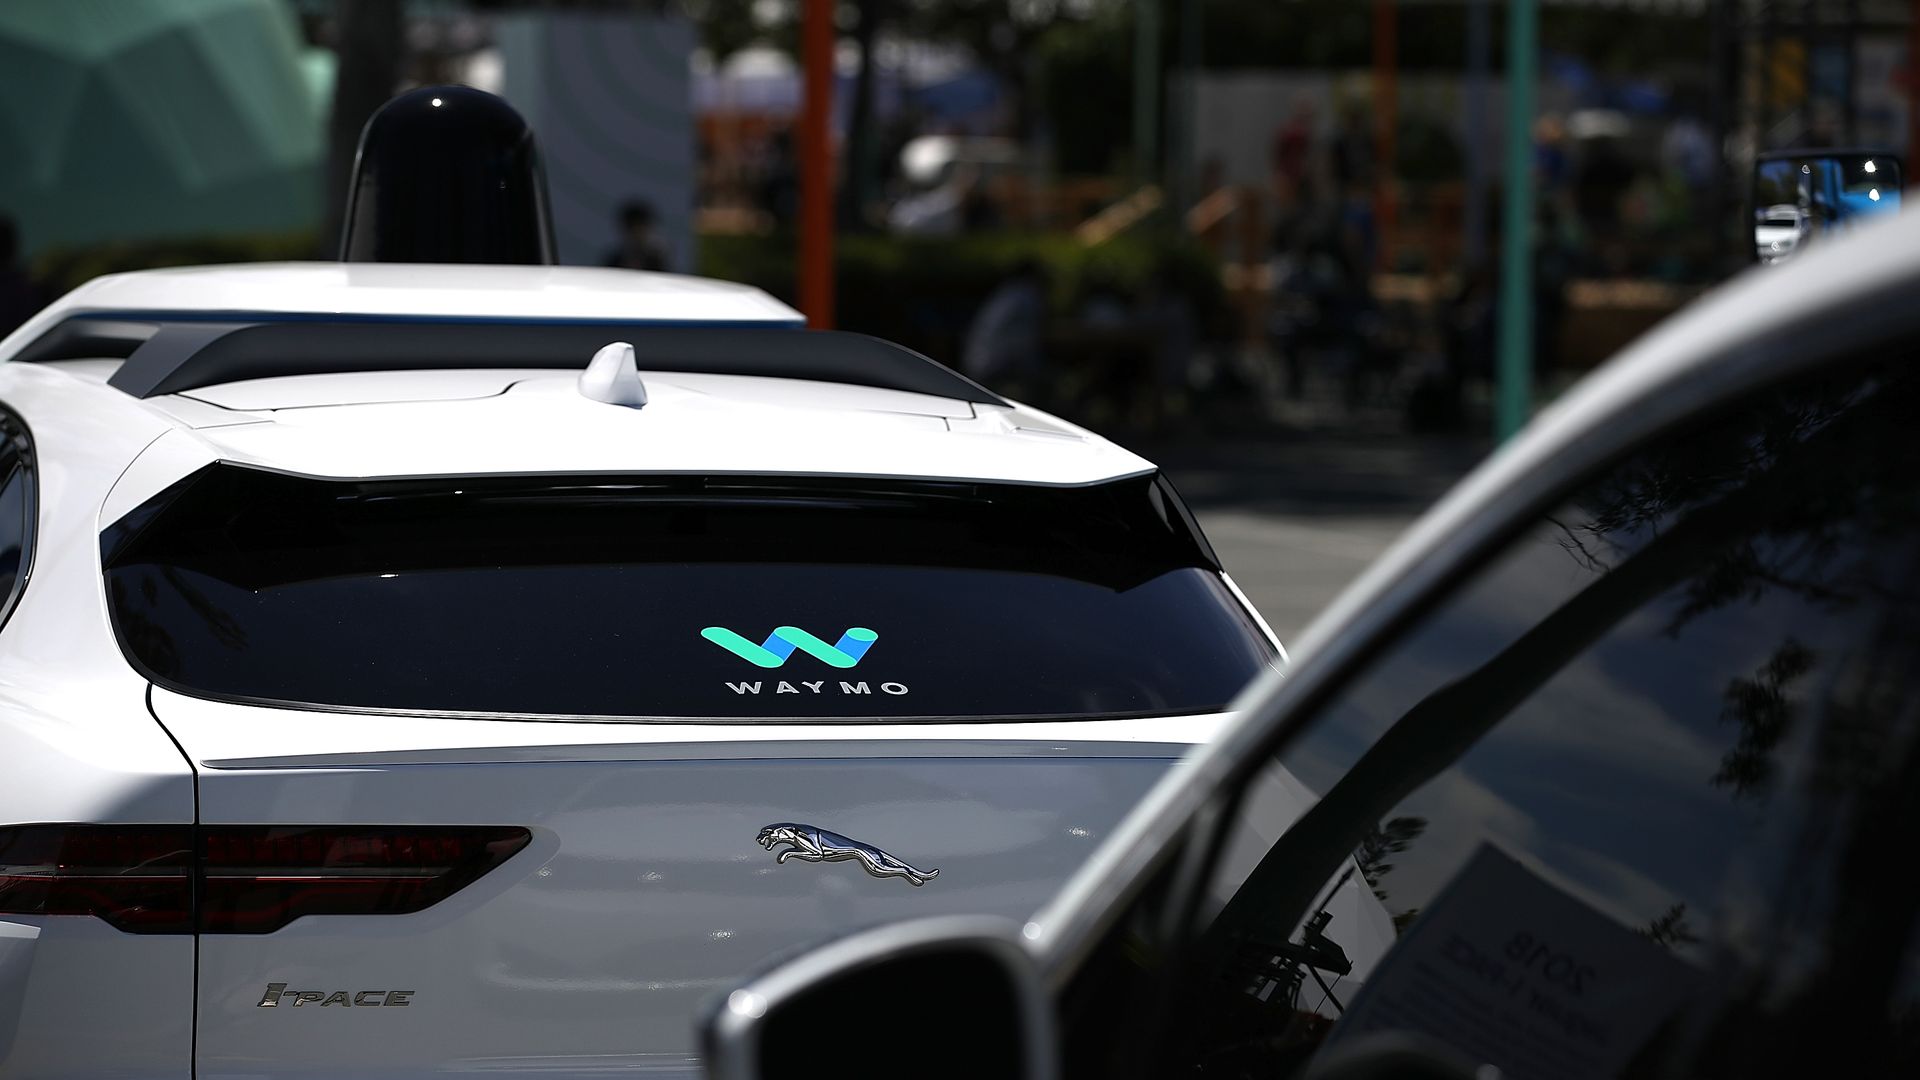 A self-driving car with the Waymo logo on its back windshield